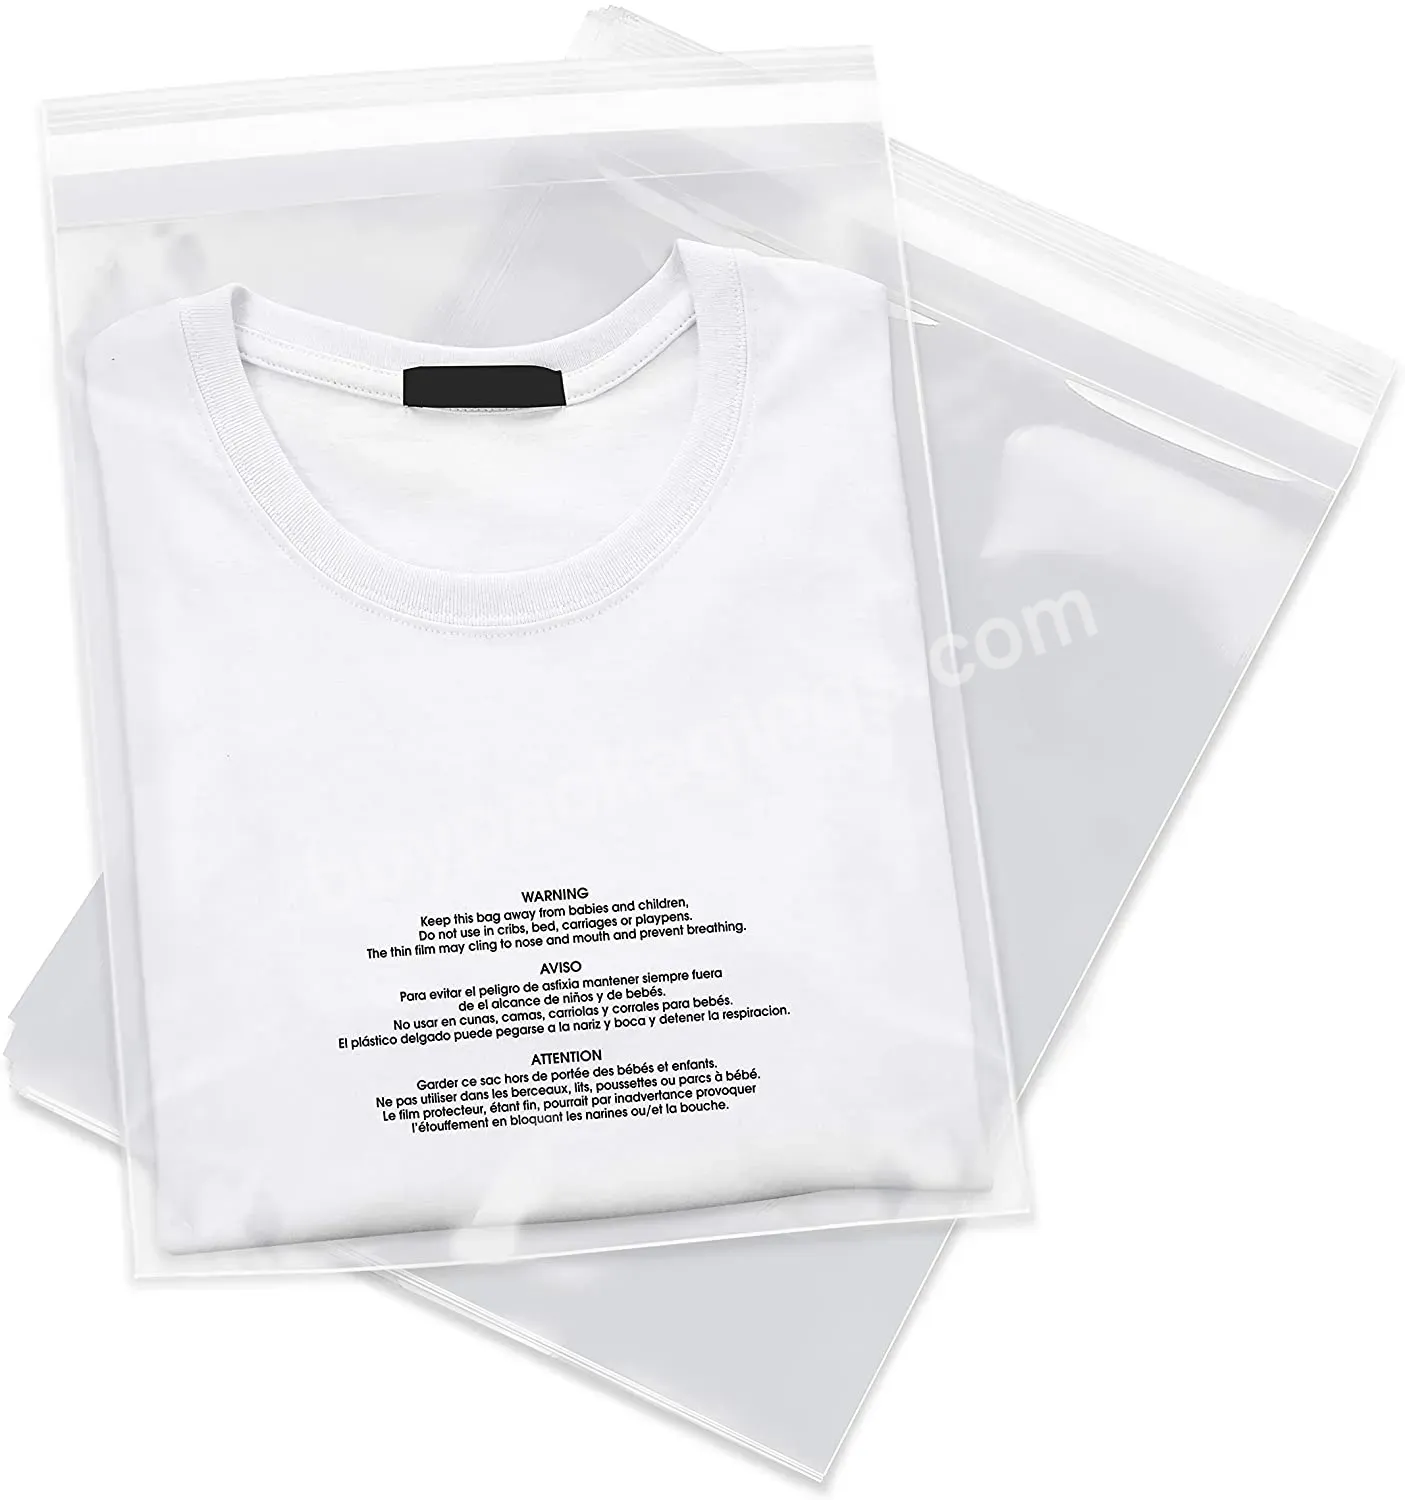 Lwb3651 Warning Bag Clothes Poly Packaging Bag Factory Manufacture Cellophane Packaging Bag - Buy Cellophane Bags,Warning Bag,Clothes Packaging Bag.